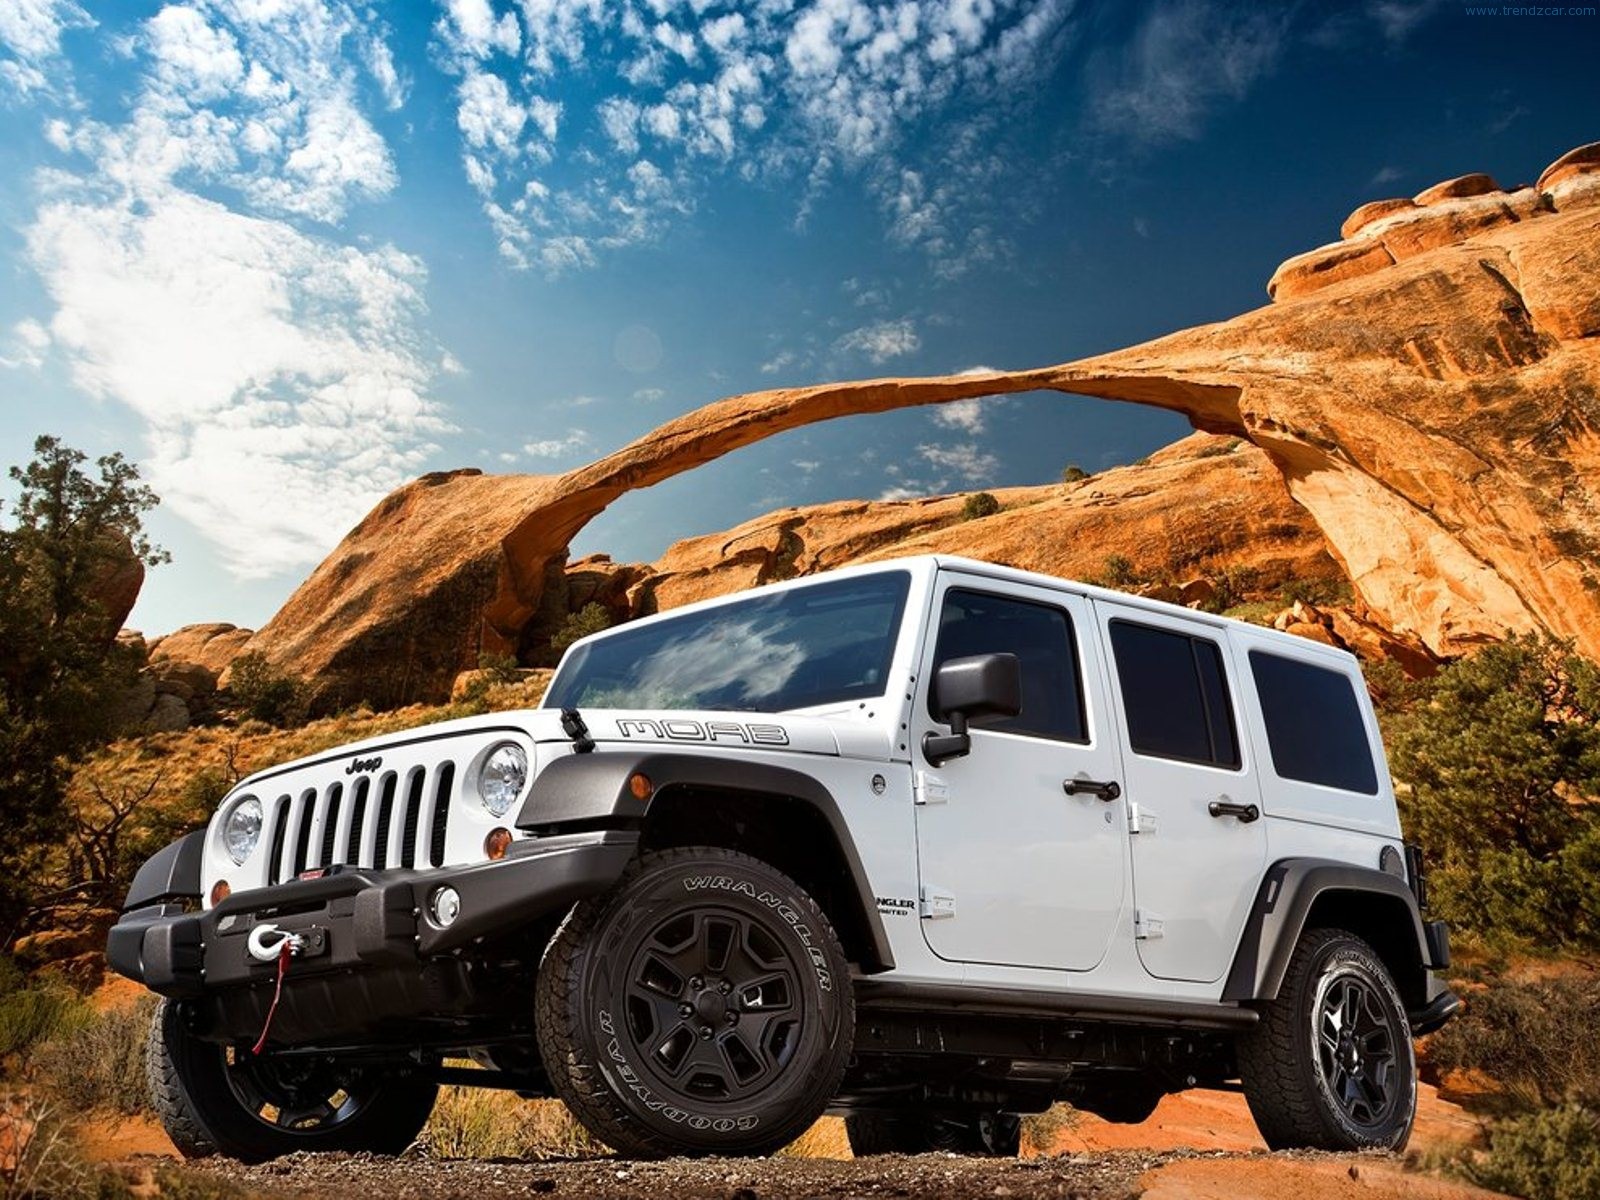 http://www.chukyo-chrysler.co.jp/up_img/2013-Jeep-Wrangler-Unlimited-Moab-Front-Angle-2.jpg